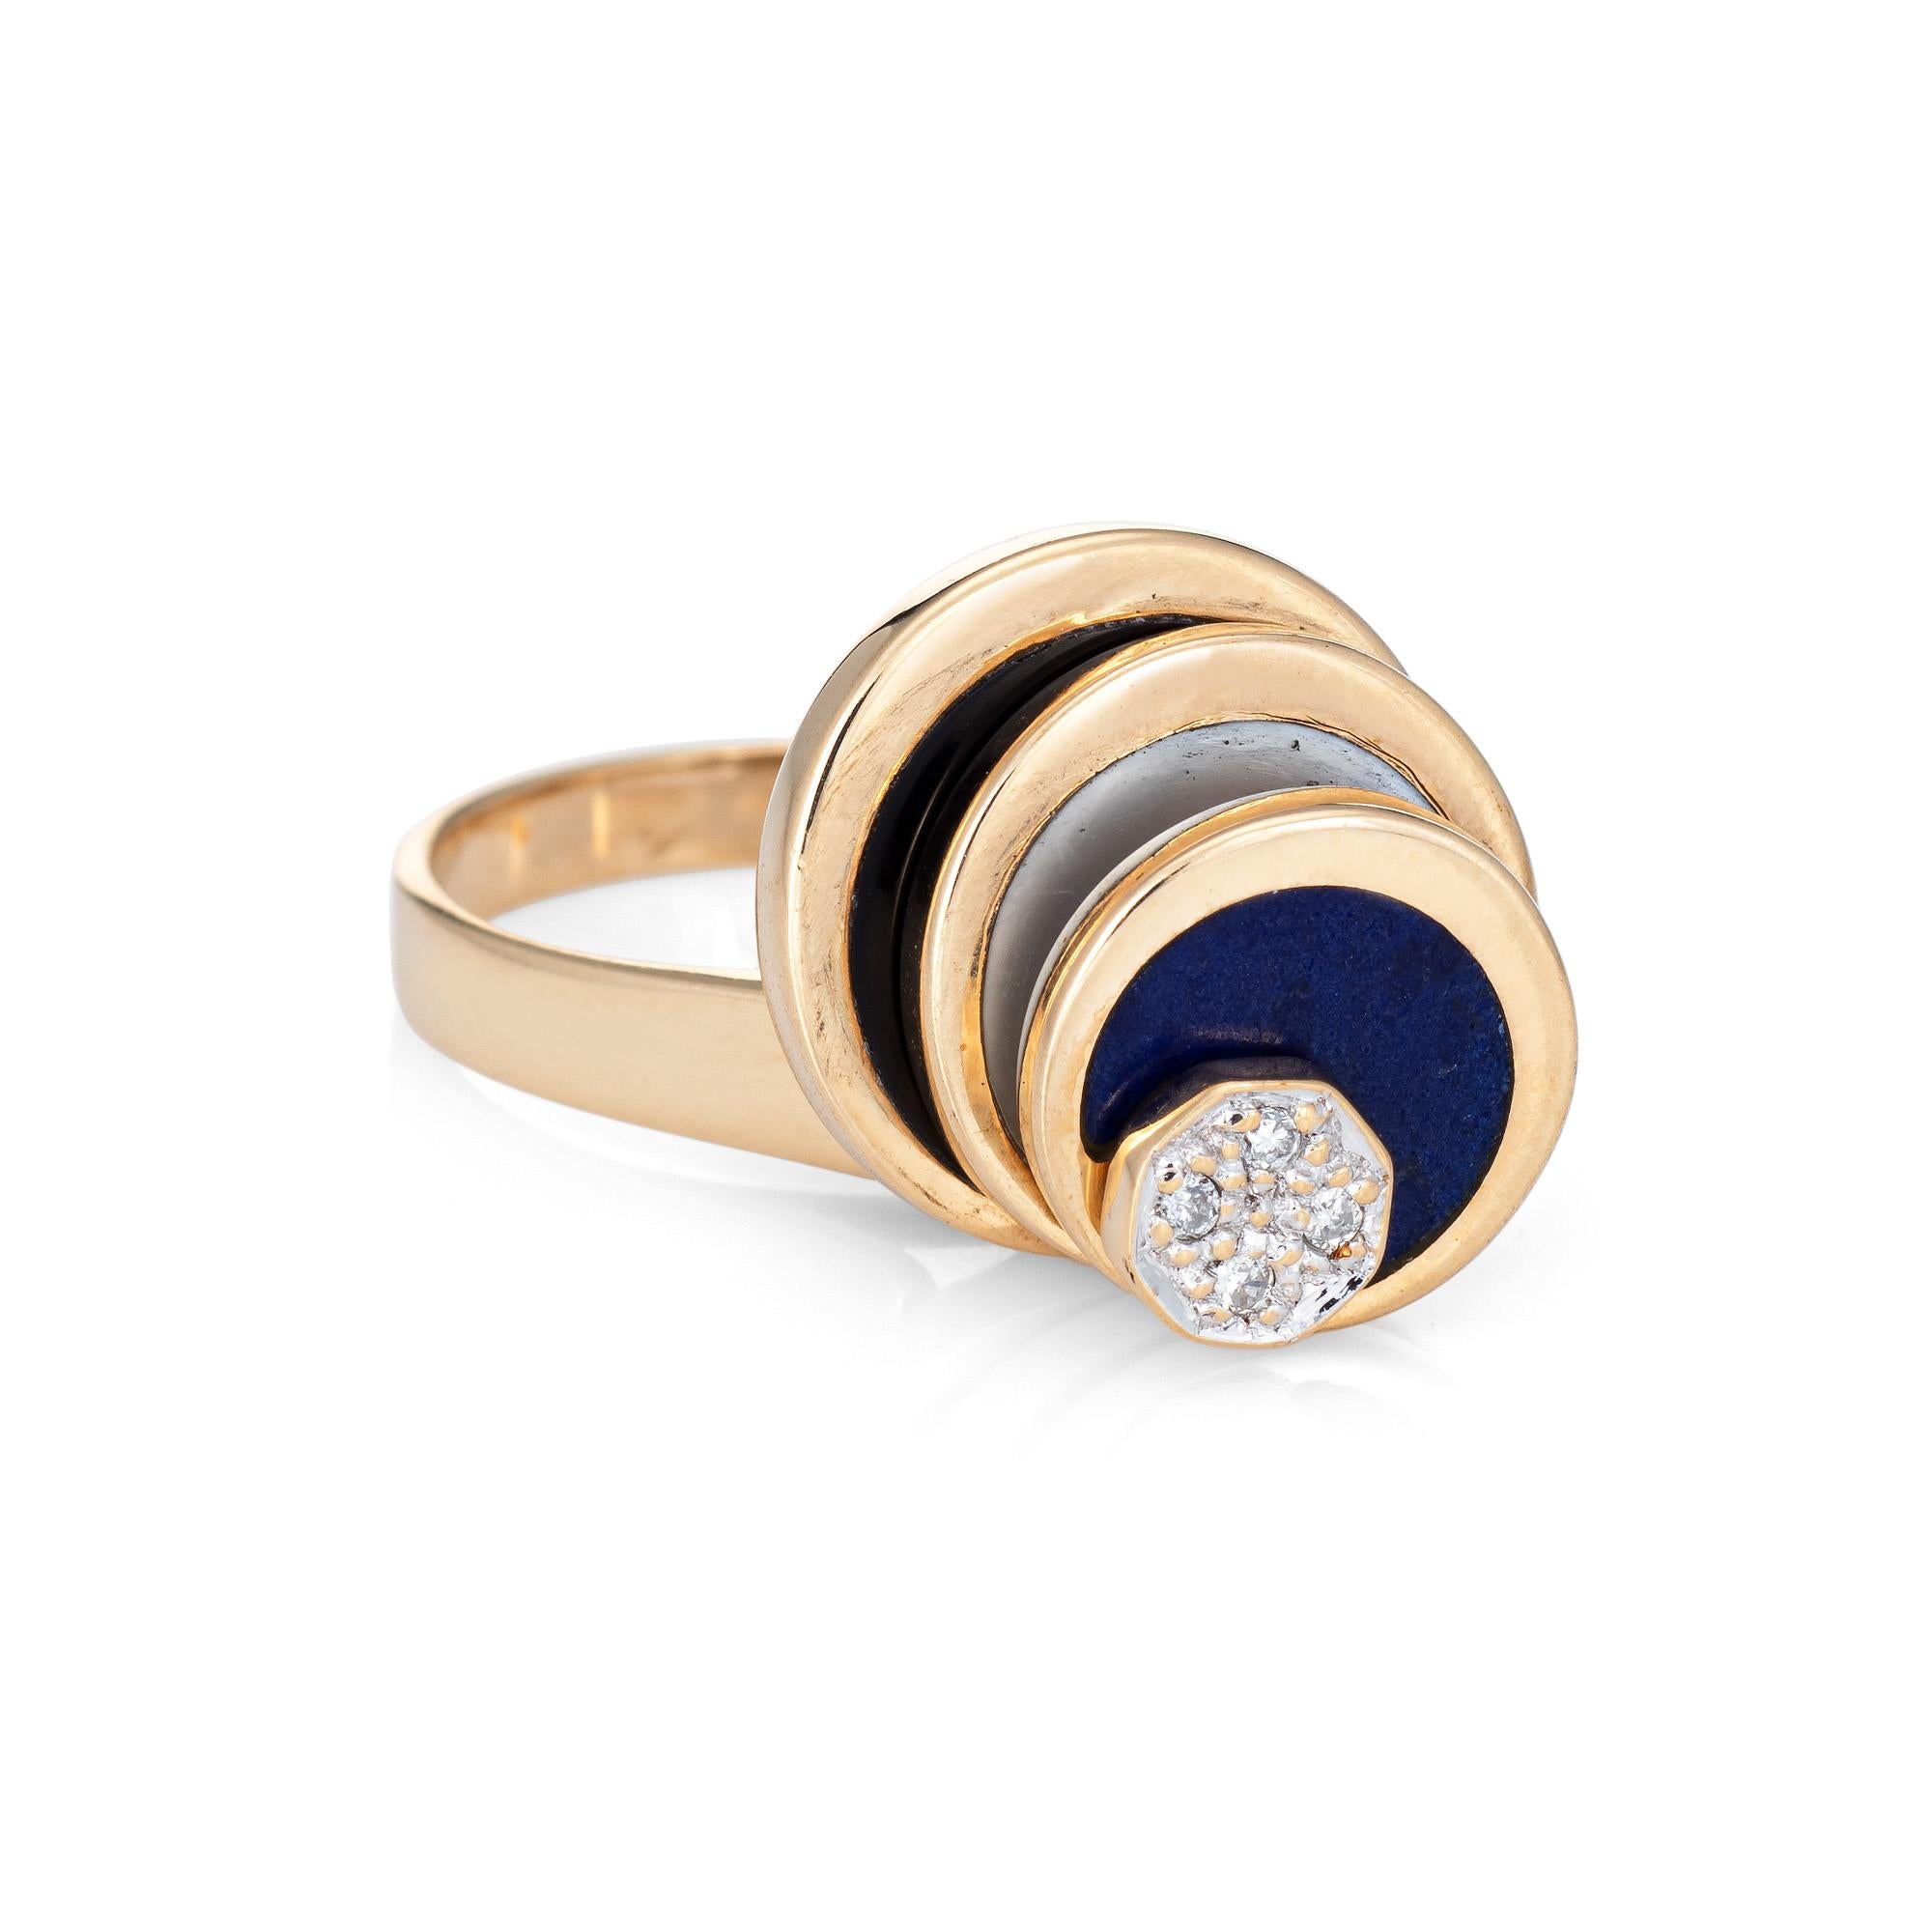 Stylish vintage diamond spinning ring (circa 1970s to 1980s) crafted in 14 karat yellow gold. 

Diamonds total an estimated 0.02 carats (estimated at H-I color and I1 clarity). Lapis lazuli, mother-of-pearl and onyx are inlaid into the graduated